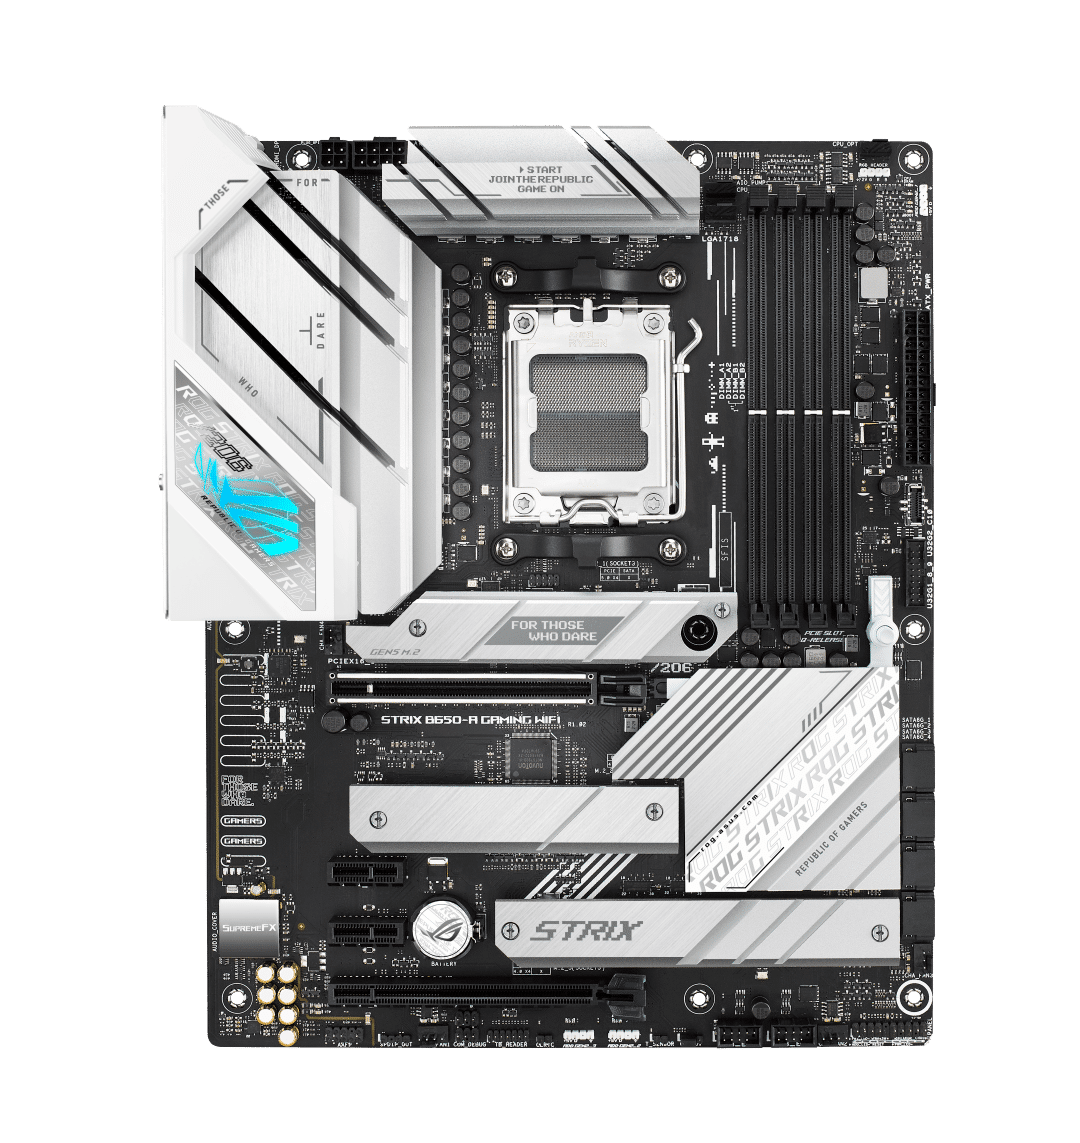 ASUS Introduces Four New AMD B650 Motherboard Series 22